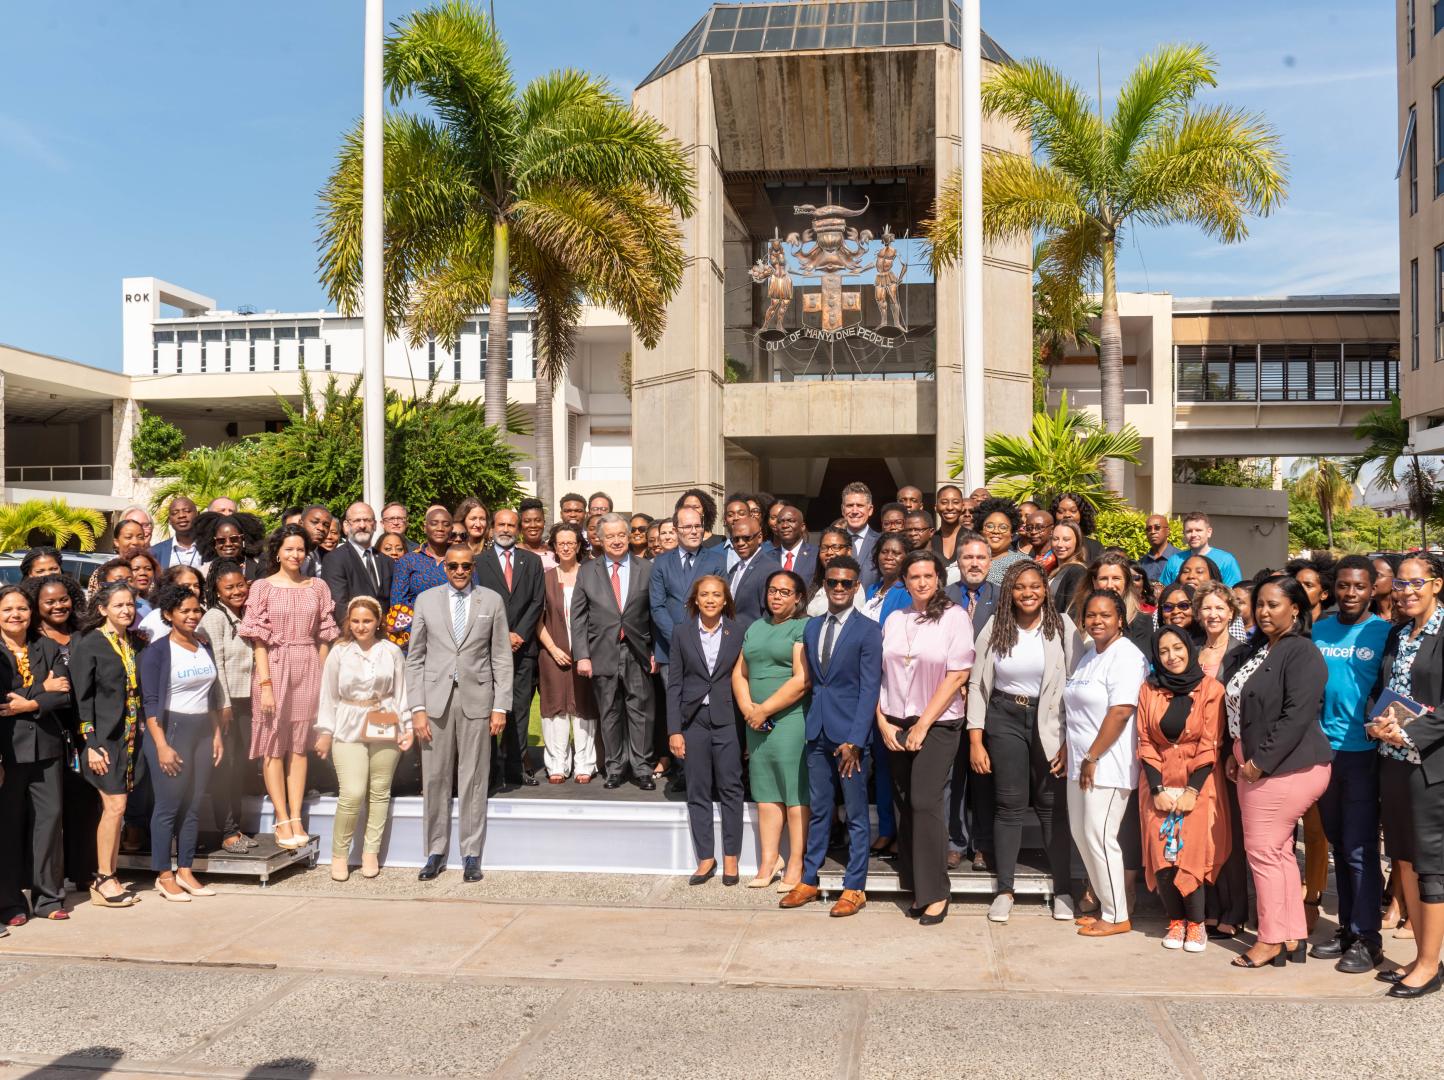 United Nations Secretary General Antonio Guterres with Staff of the United Nations in Jamaica